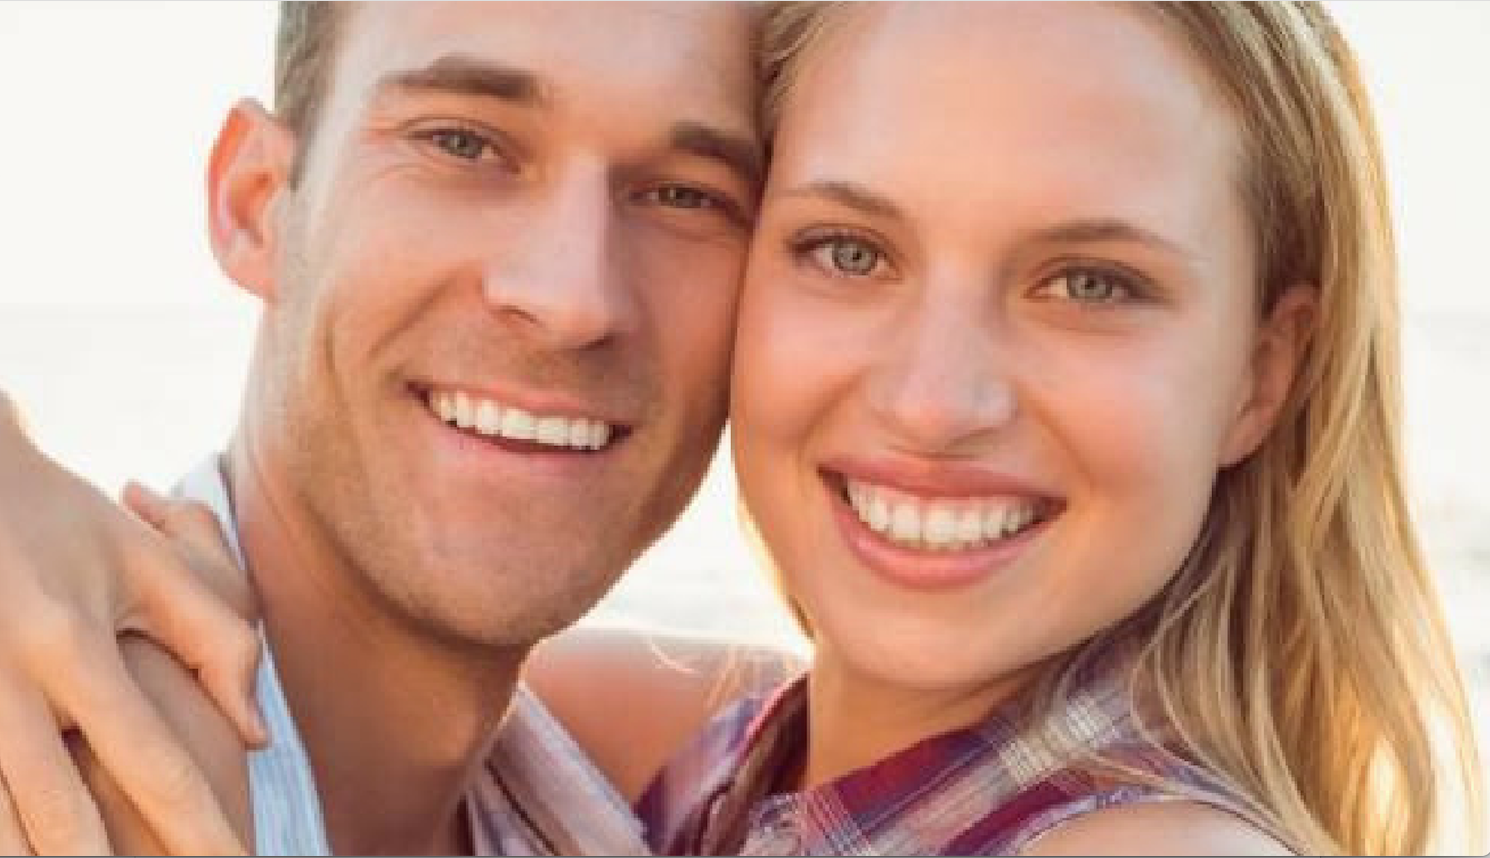 cosmetic dentistry options